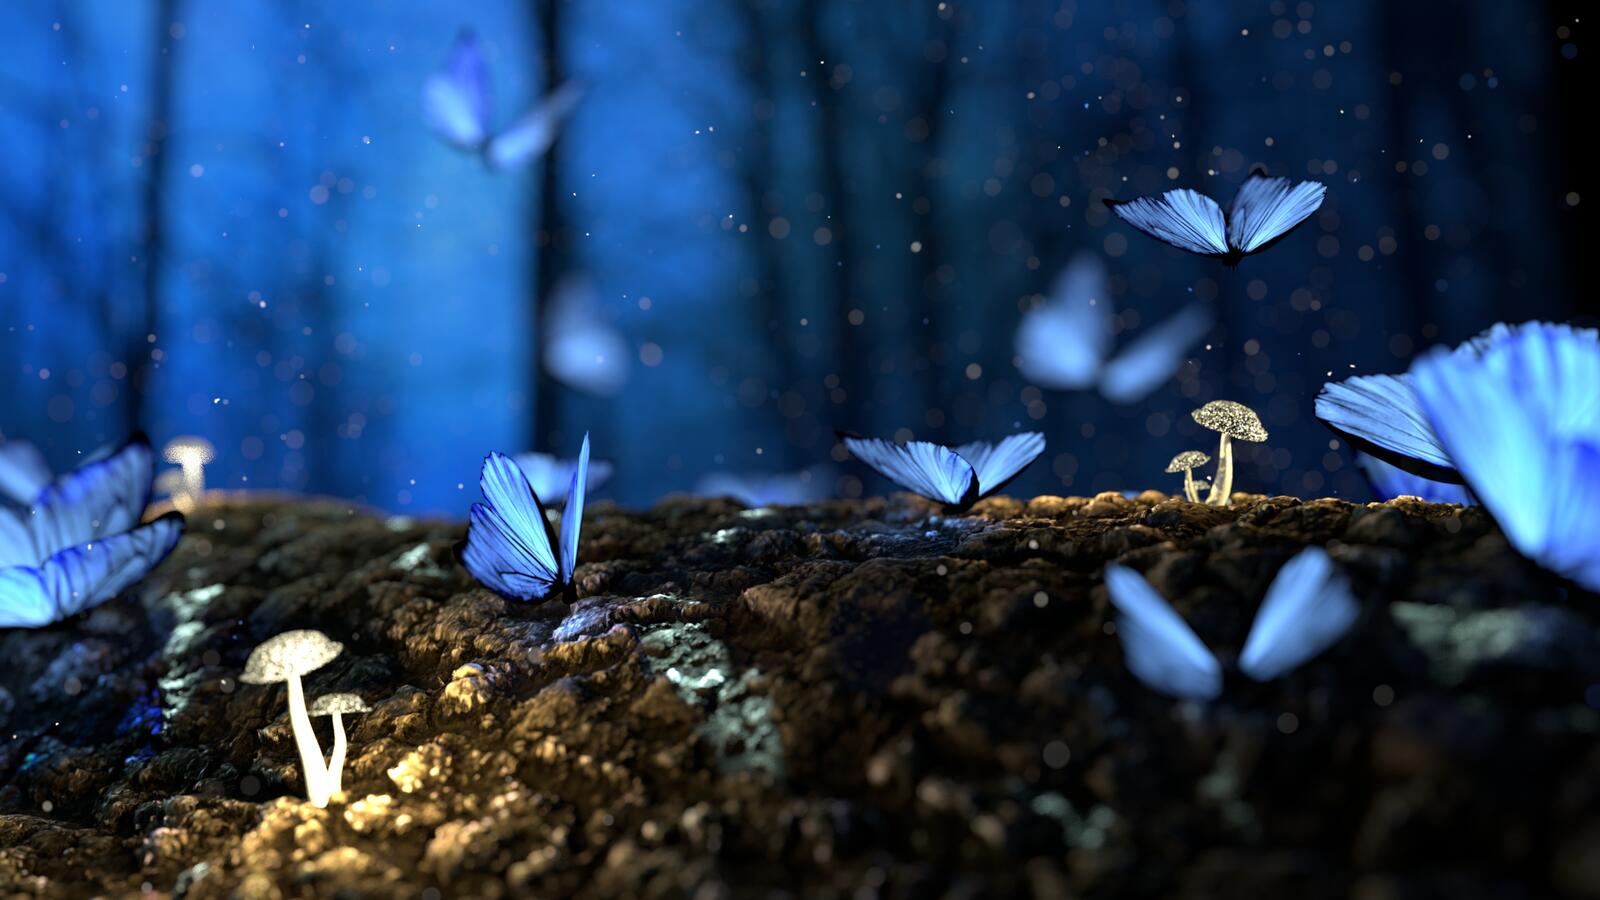 Free photo Wonderful forest with blue butterflies and glowing mushrooms